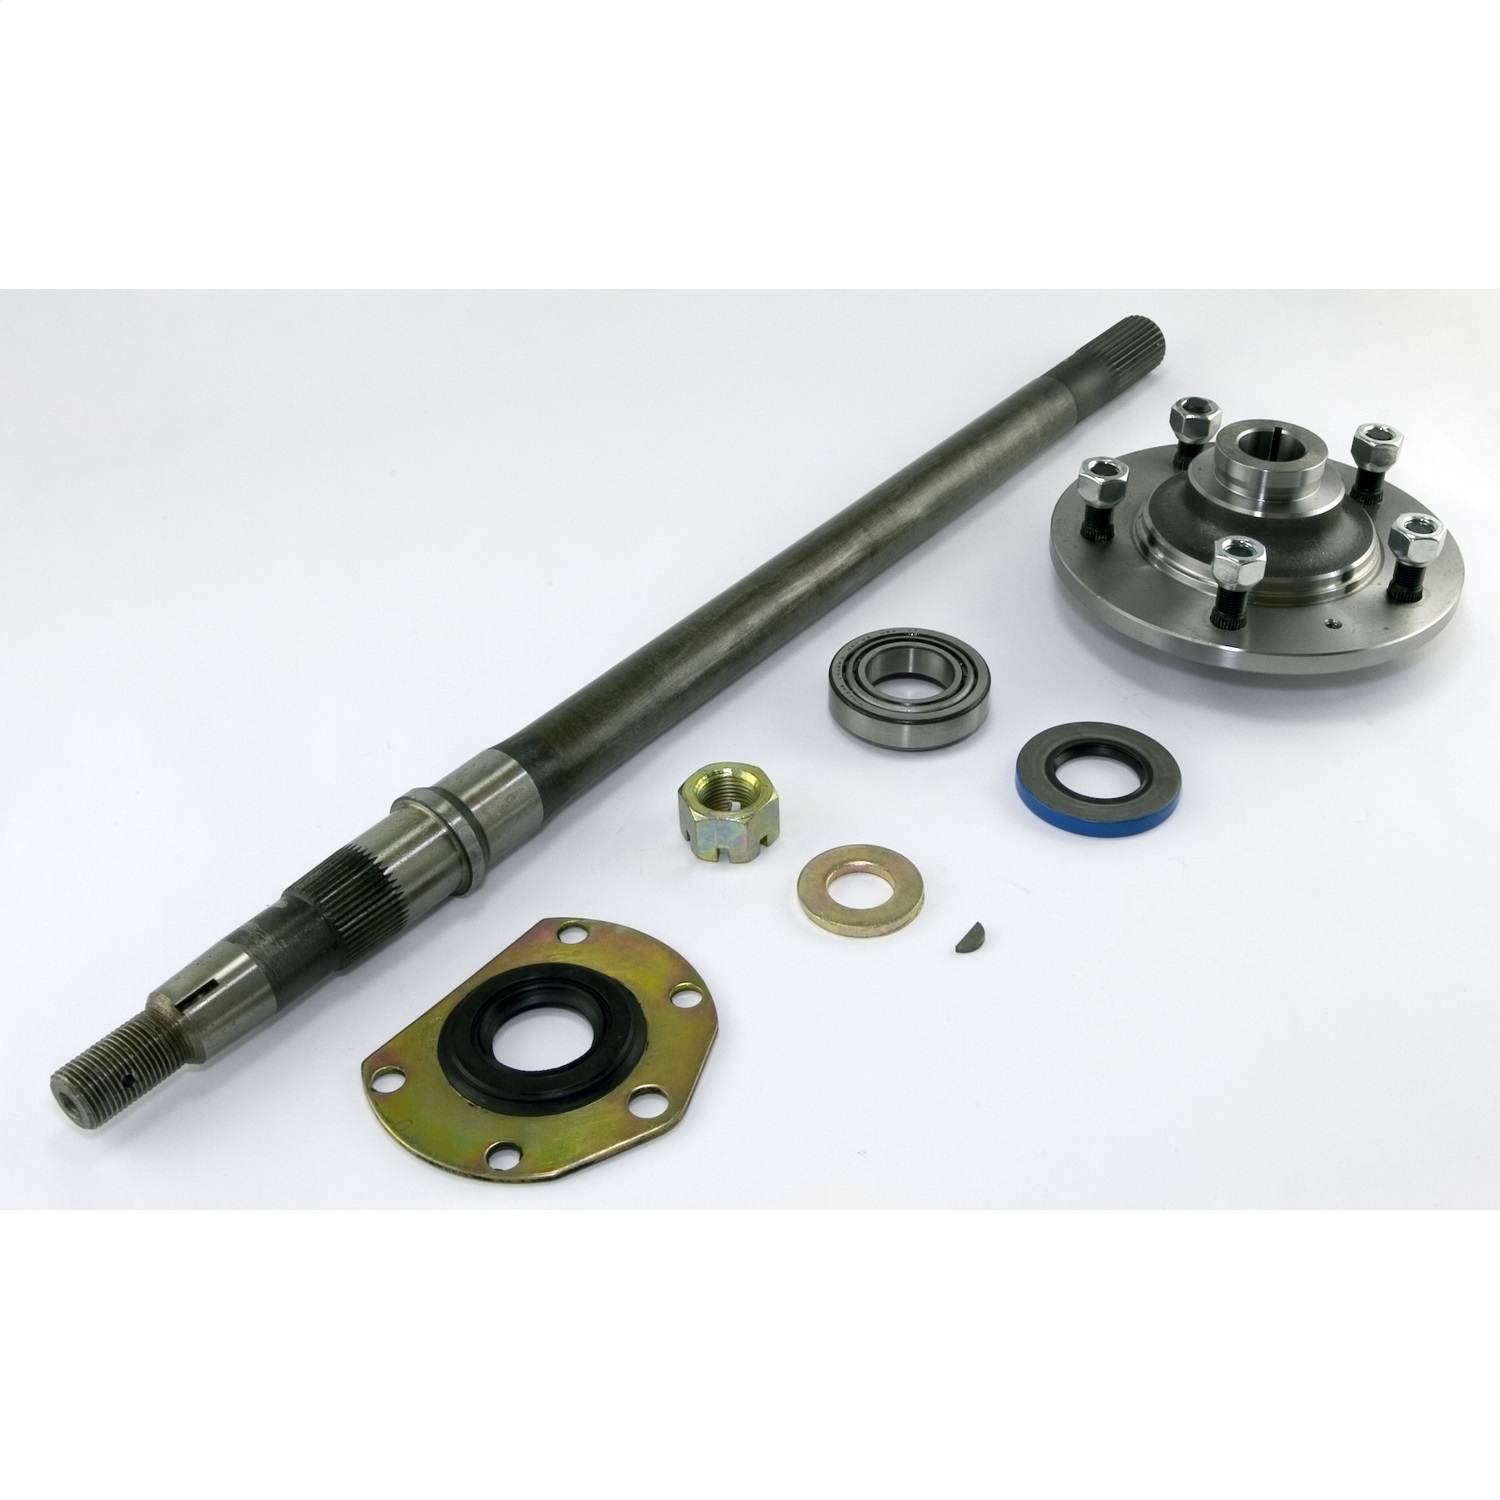 Jeep Omix Axle Shaft Kit Amc 20 Narrow, Lh 26.25 Inch, Includes: Axle, Hub, Bearing, Cup, Inner